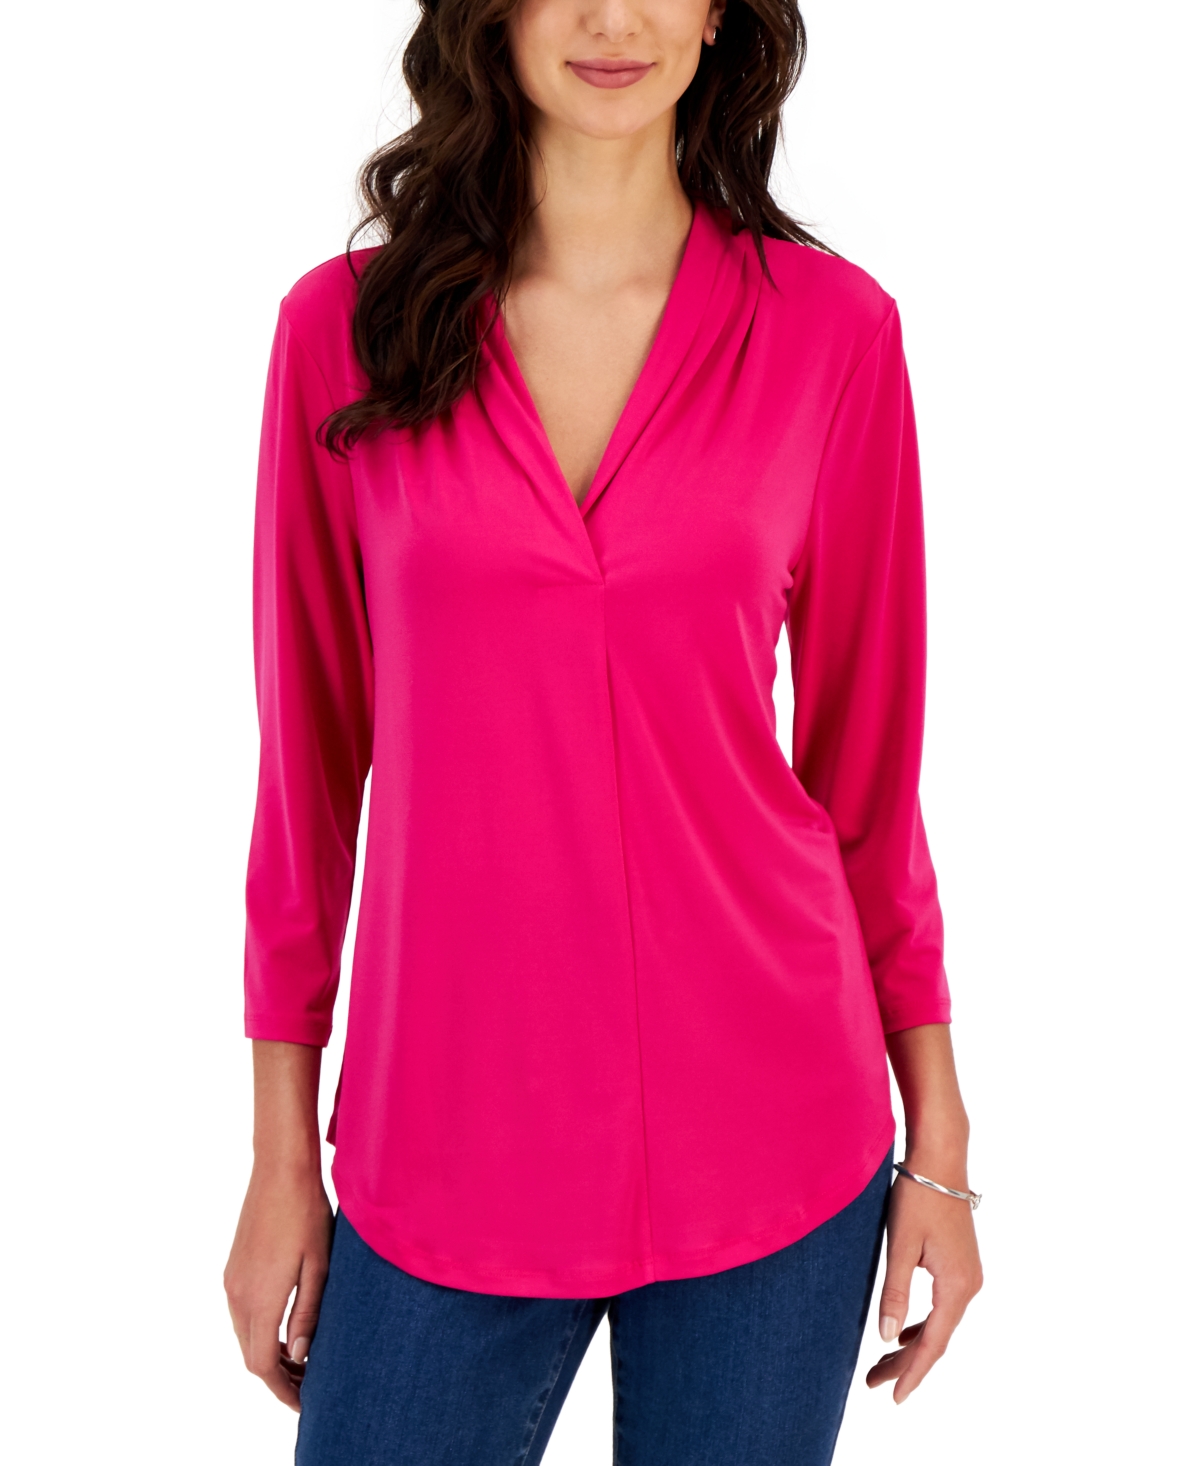 CHARTER CLUB WOMEN'S 3/4-SLEEVE TOP, CREATED FOR MACY'S